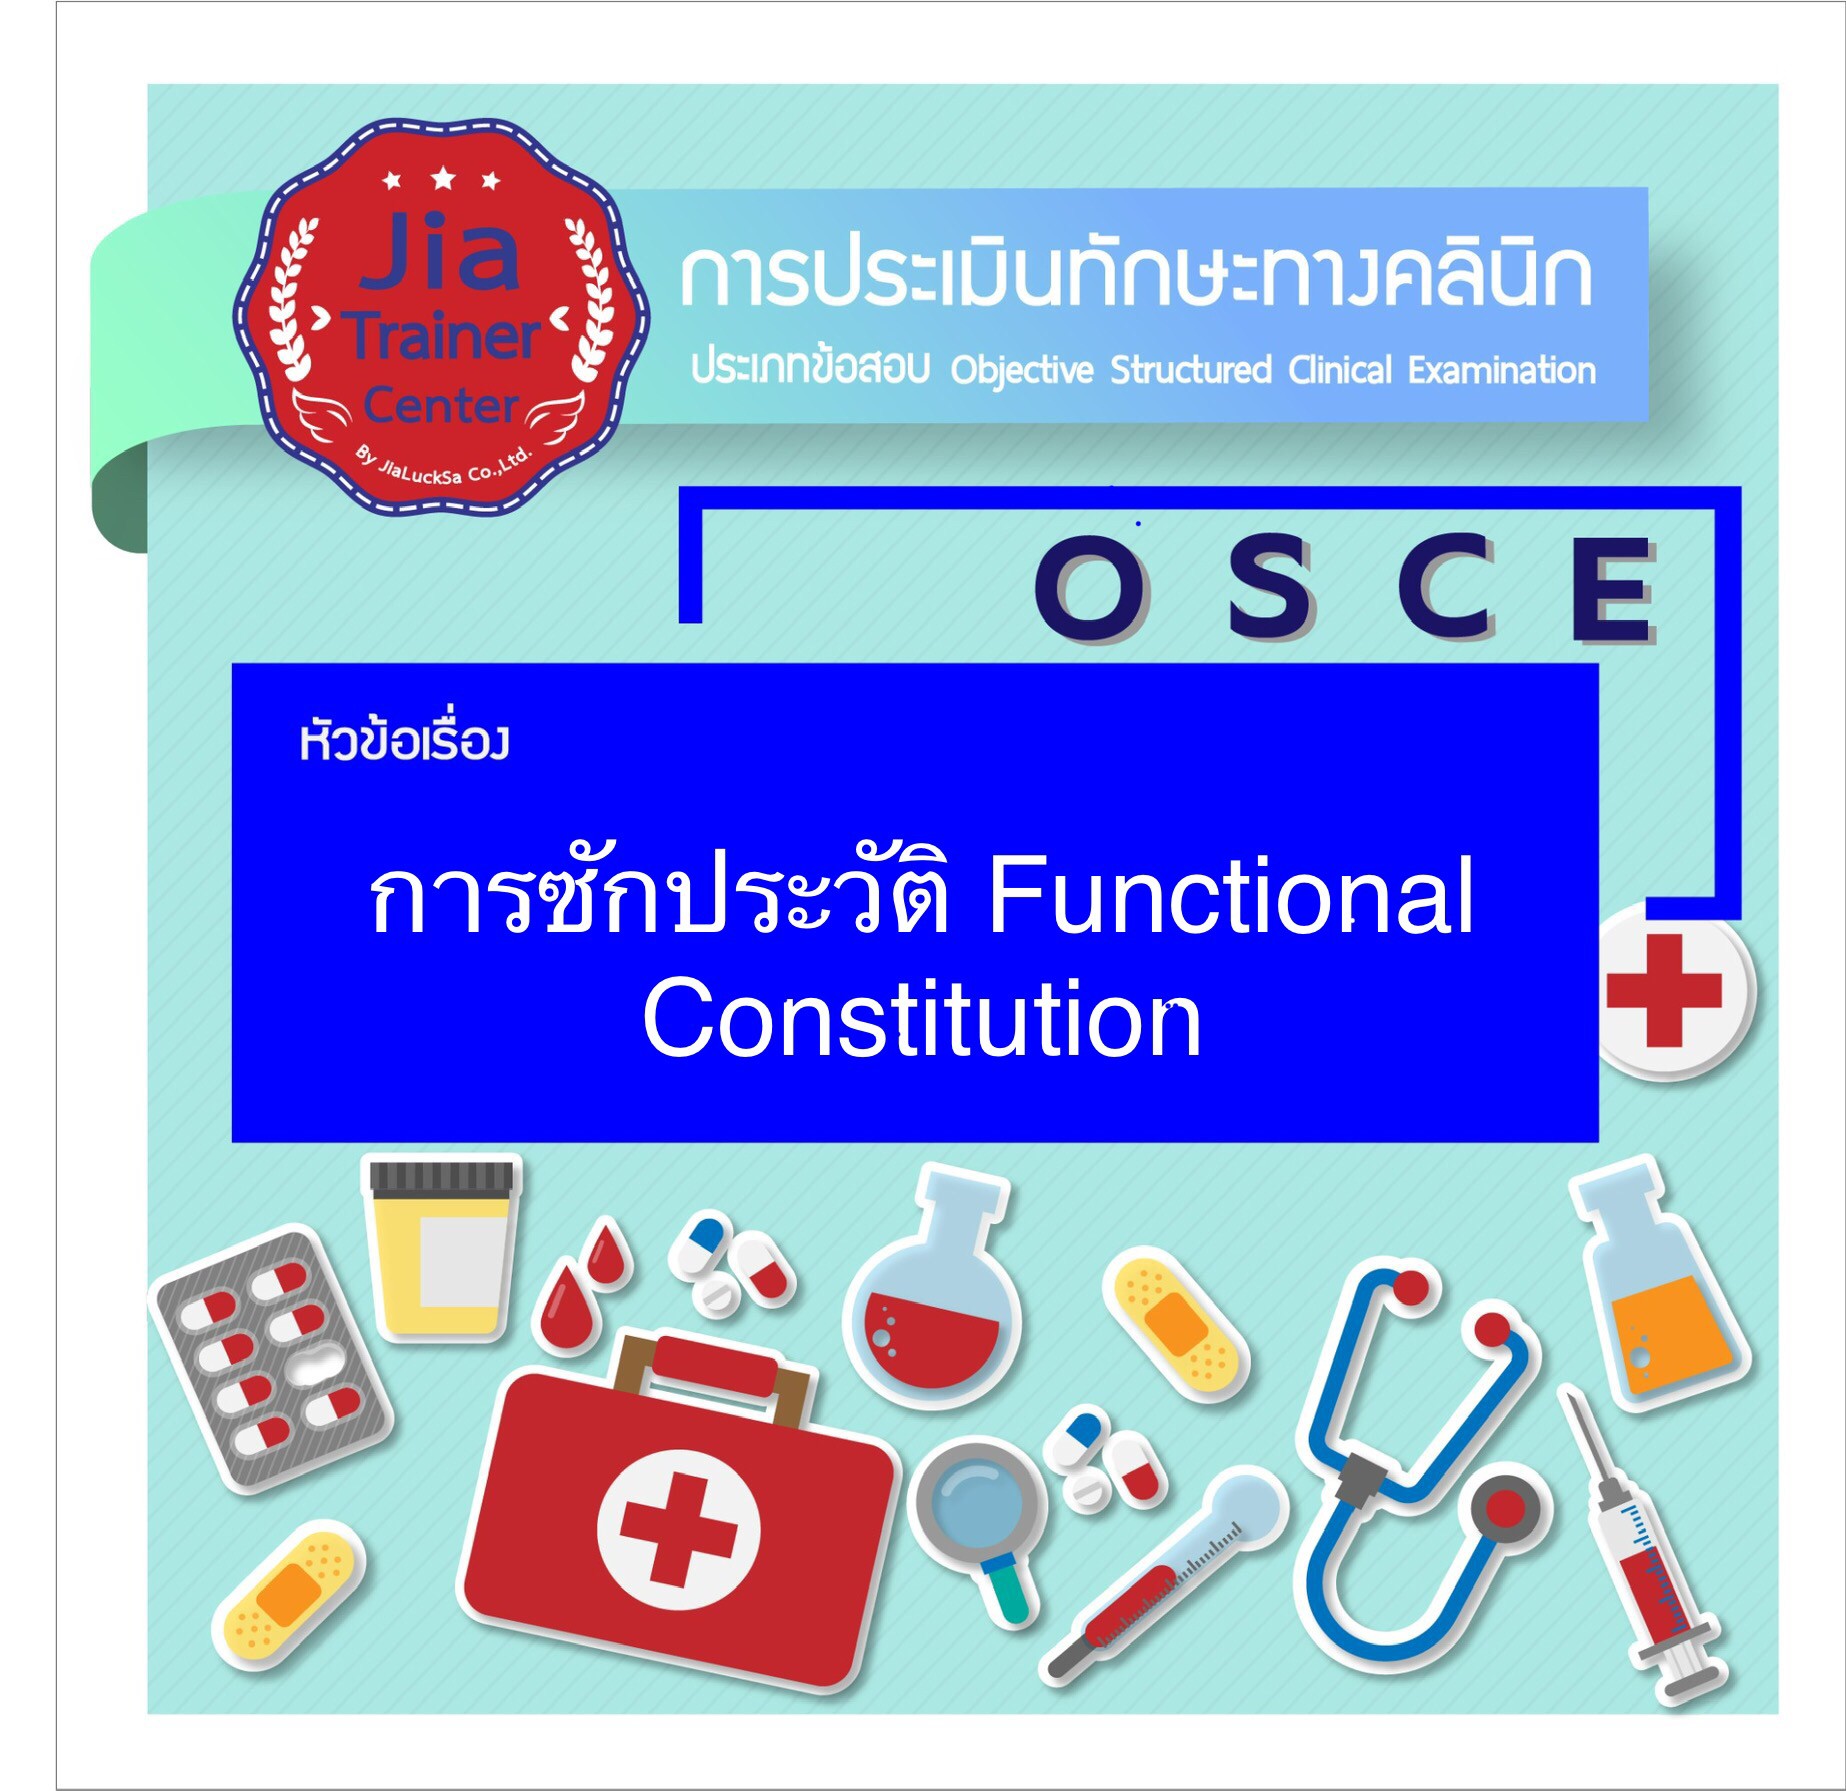 Osce-History taking of Functional Constitution